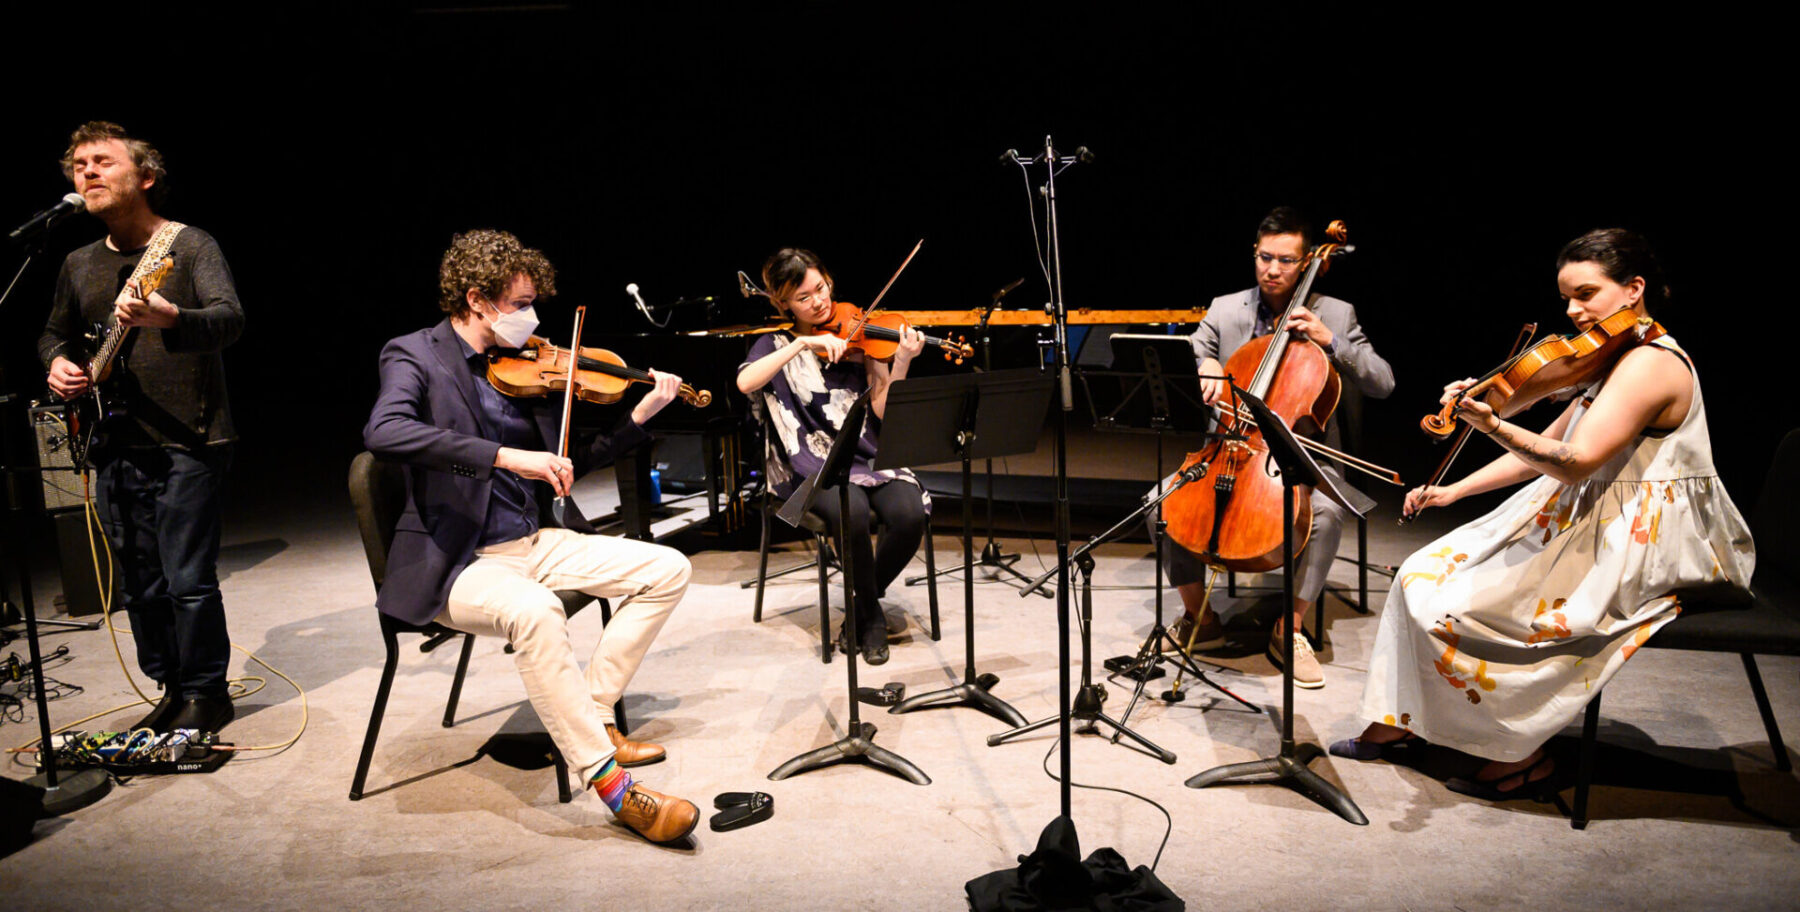 Gabriel Kahane playing guitar on the left with the Capilano String Quartet on the right